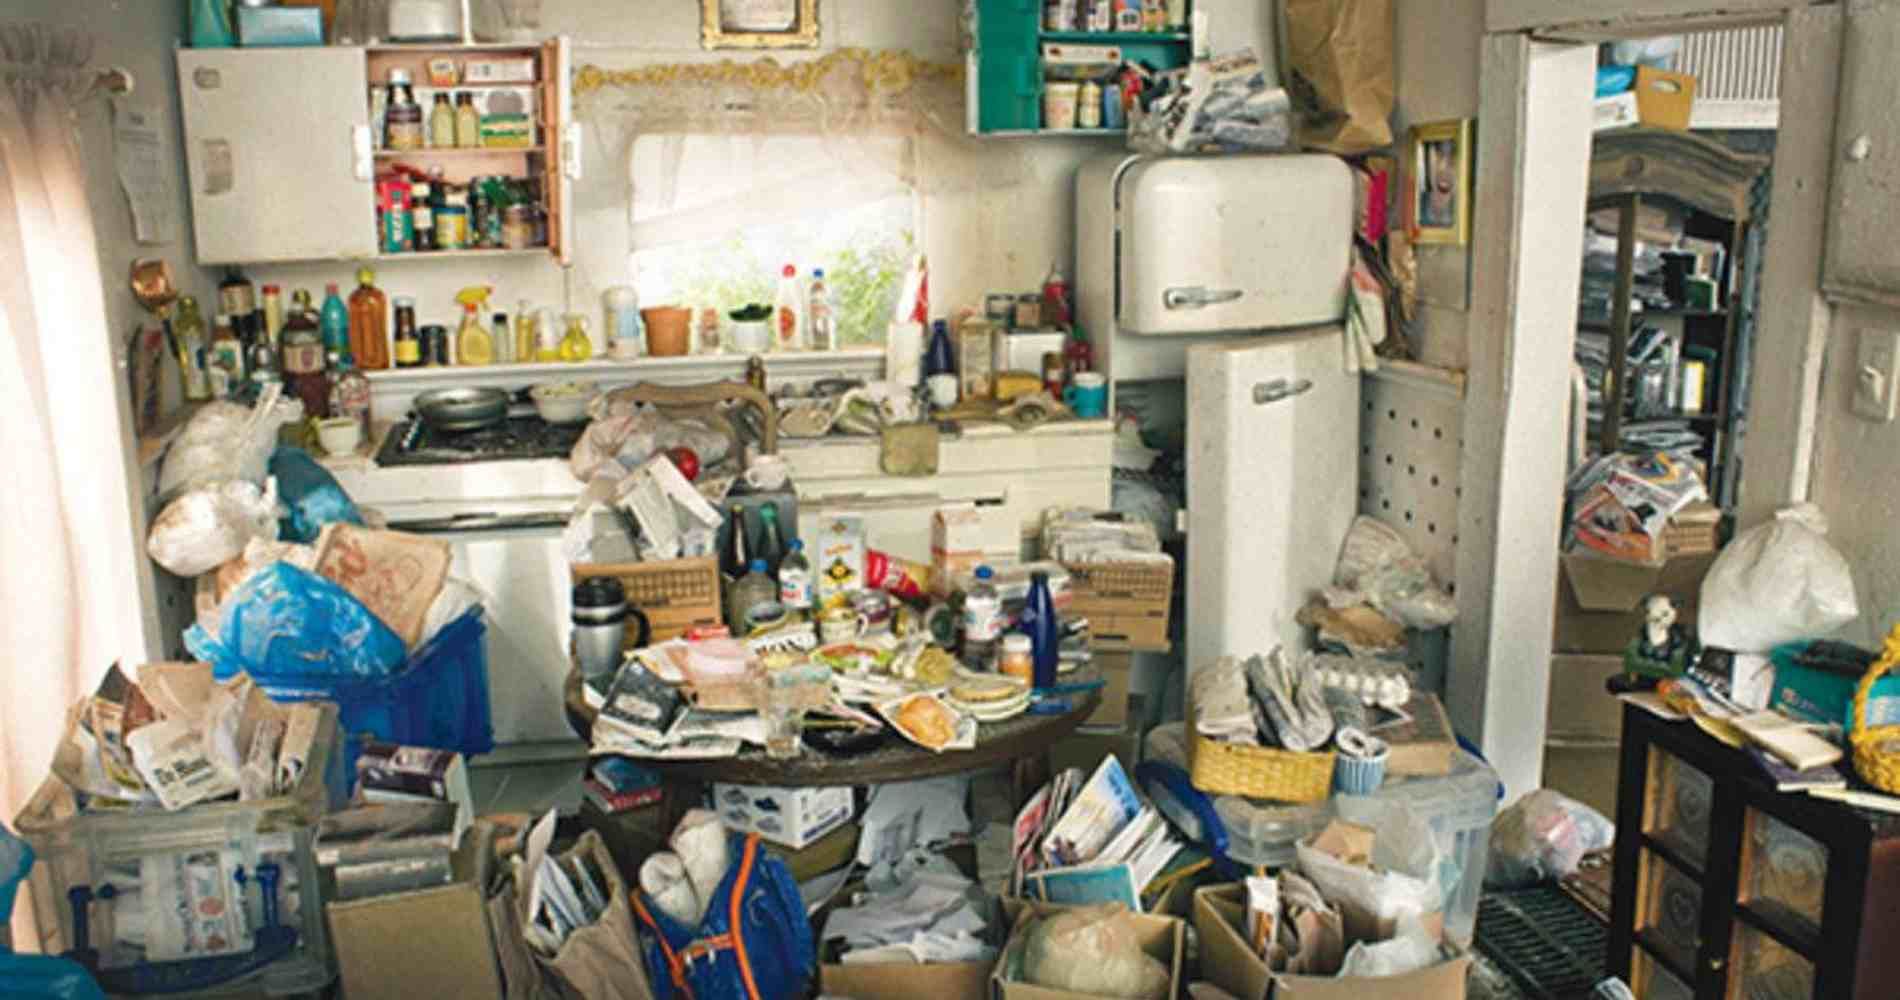 #1 for Hoarding Cleanup in Phoenix, AZ with Over 1200 5-Star Reviews!